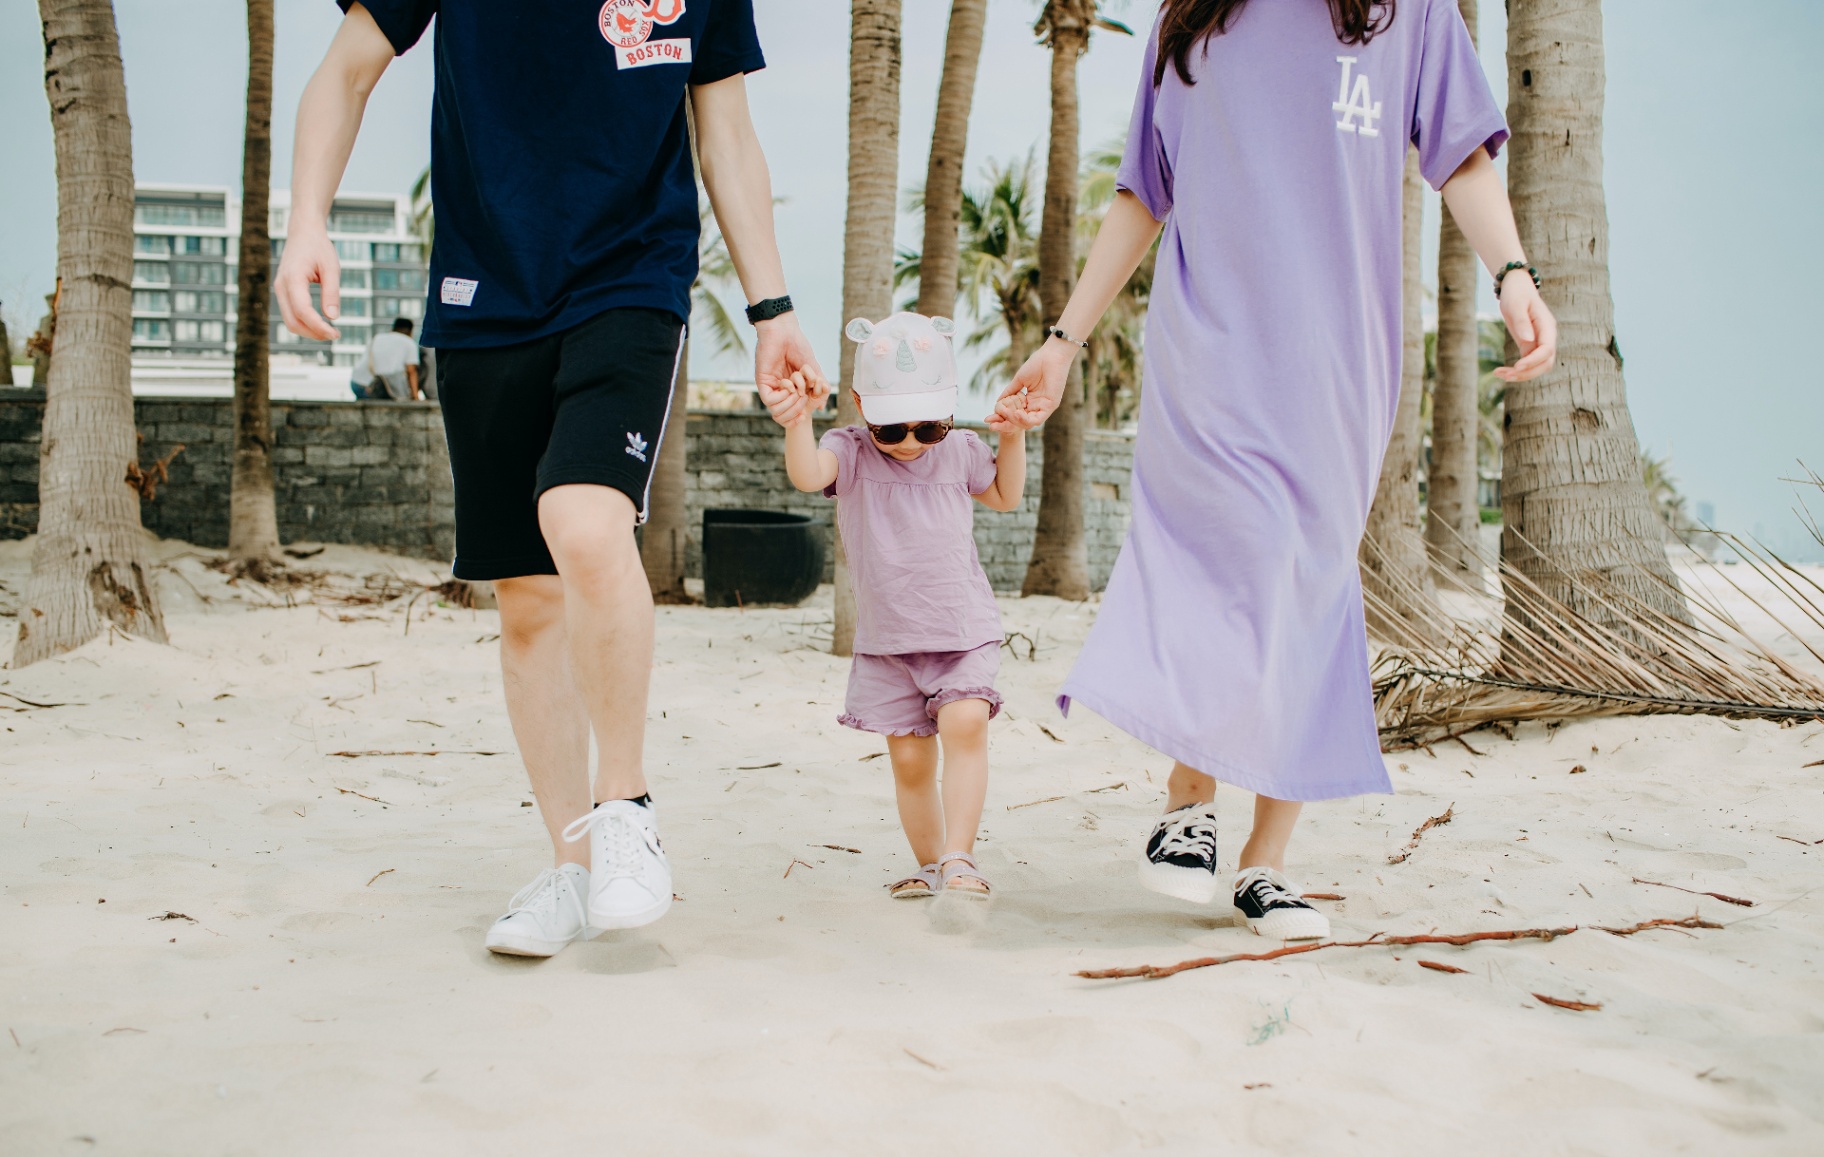 Young couple walking on beach holding the hand of their toddler daughter. Our St Pete, FL marriage therapist provides effective counseling for common couple's challenges including infidelity, trust, and communication. Learn more today.